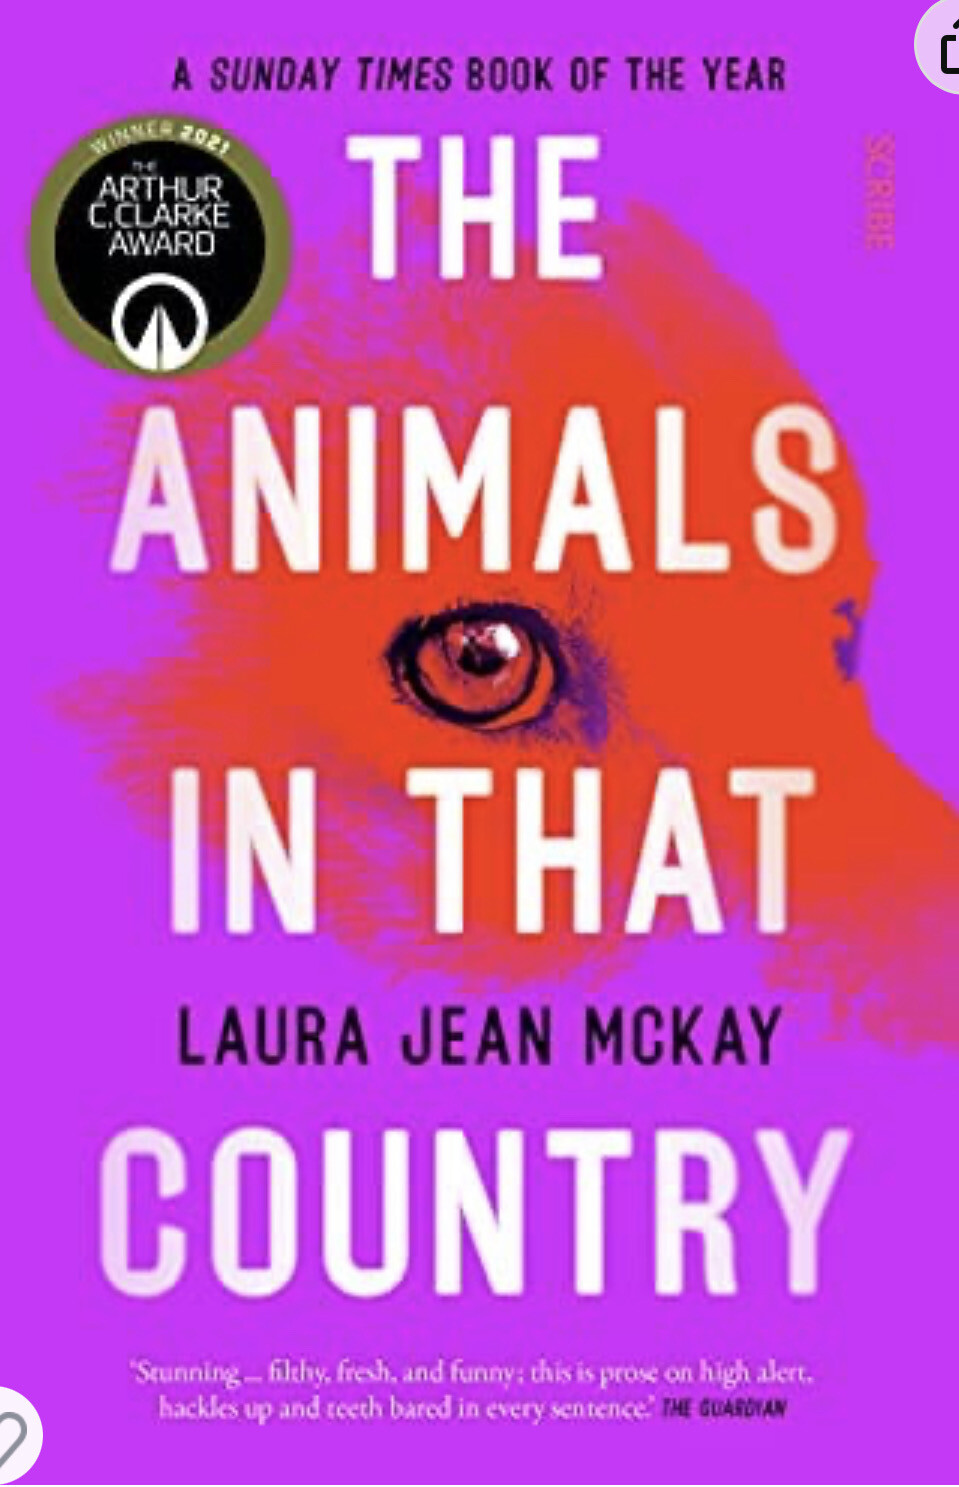 The Animals In That Country